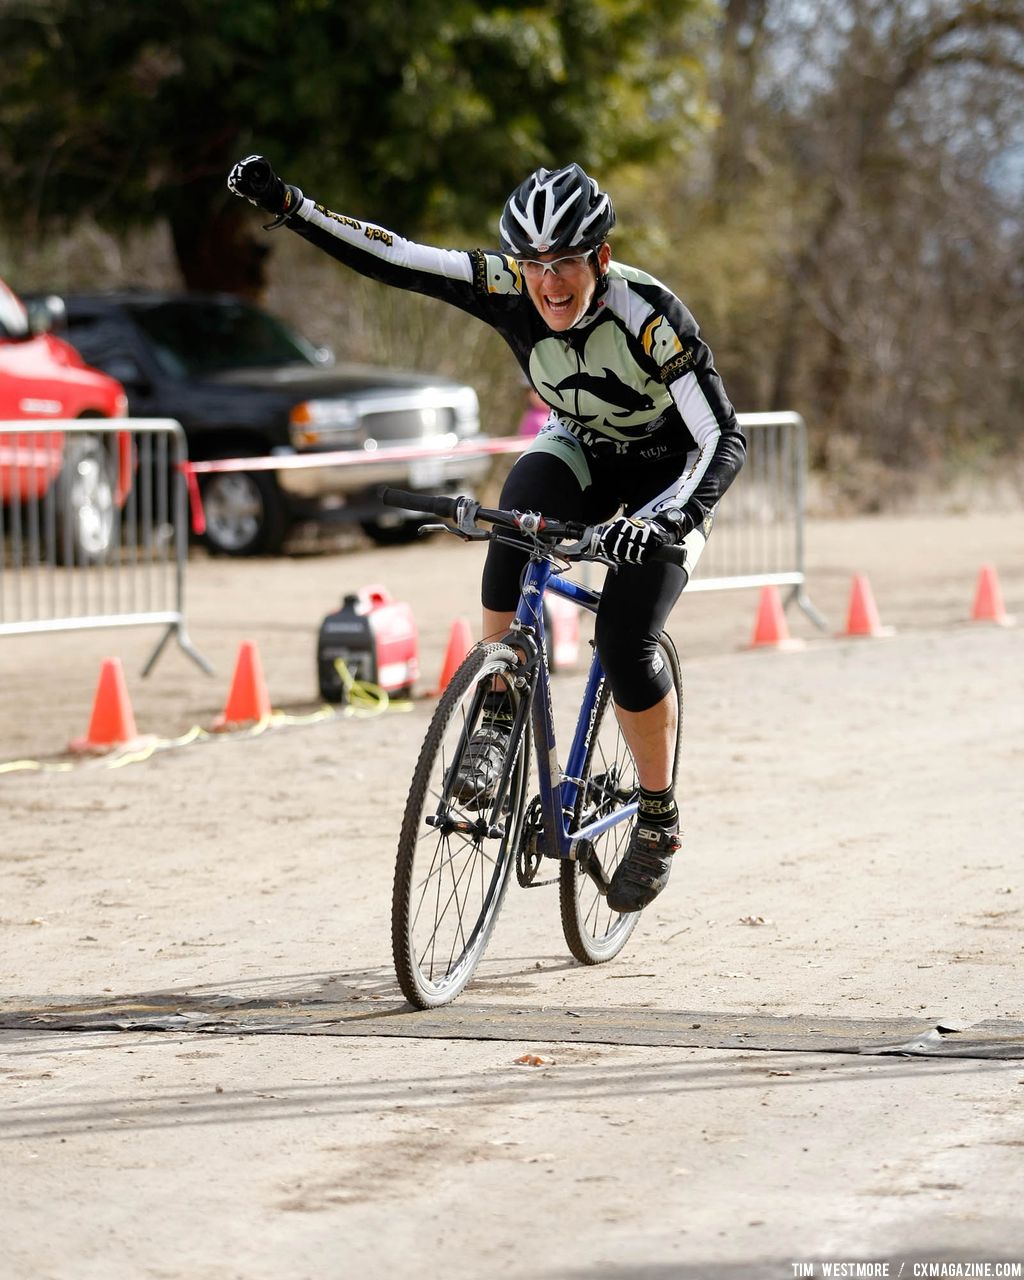 Southern California Prestige Series of Cyclocross 22: The Final Showdown  © Tim Westmore